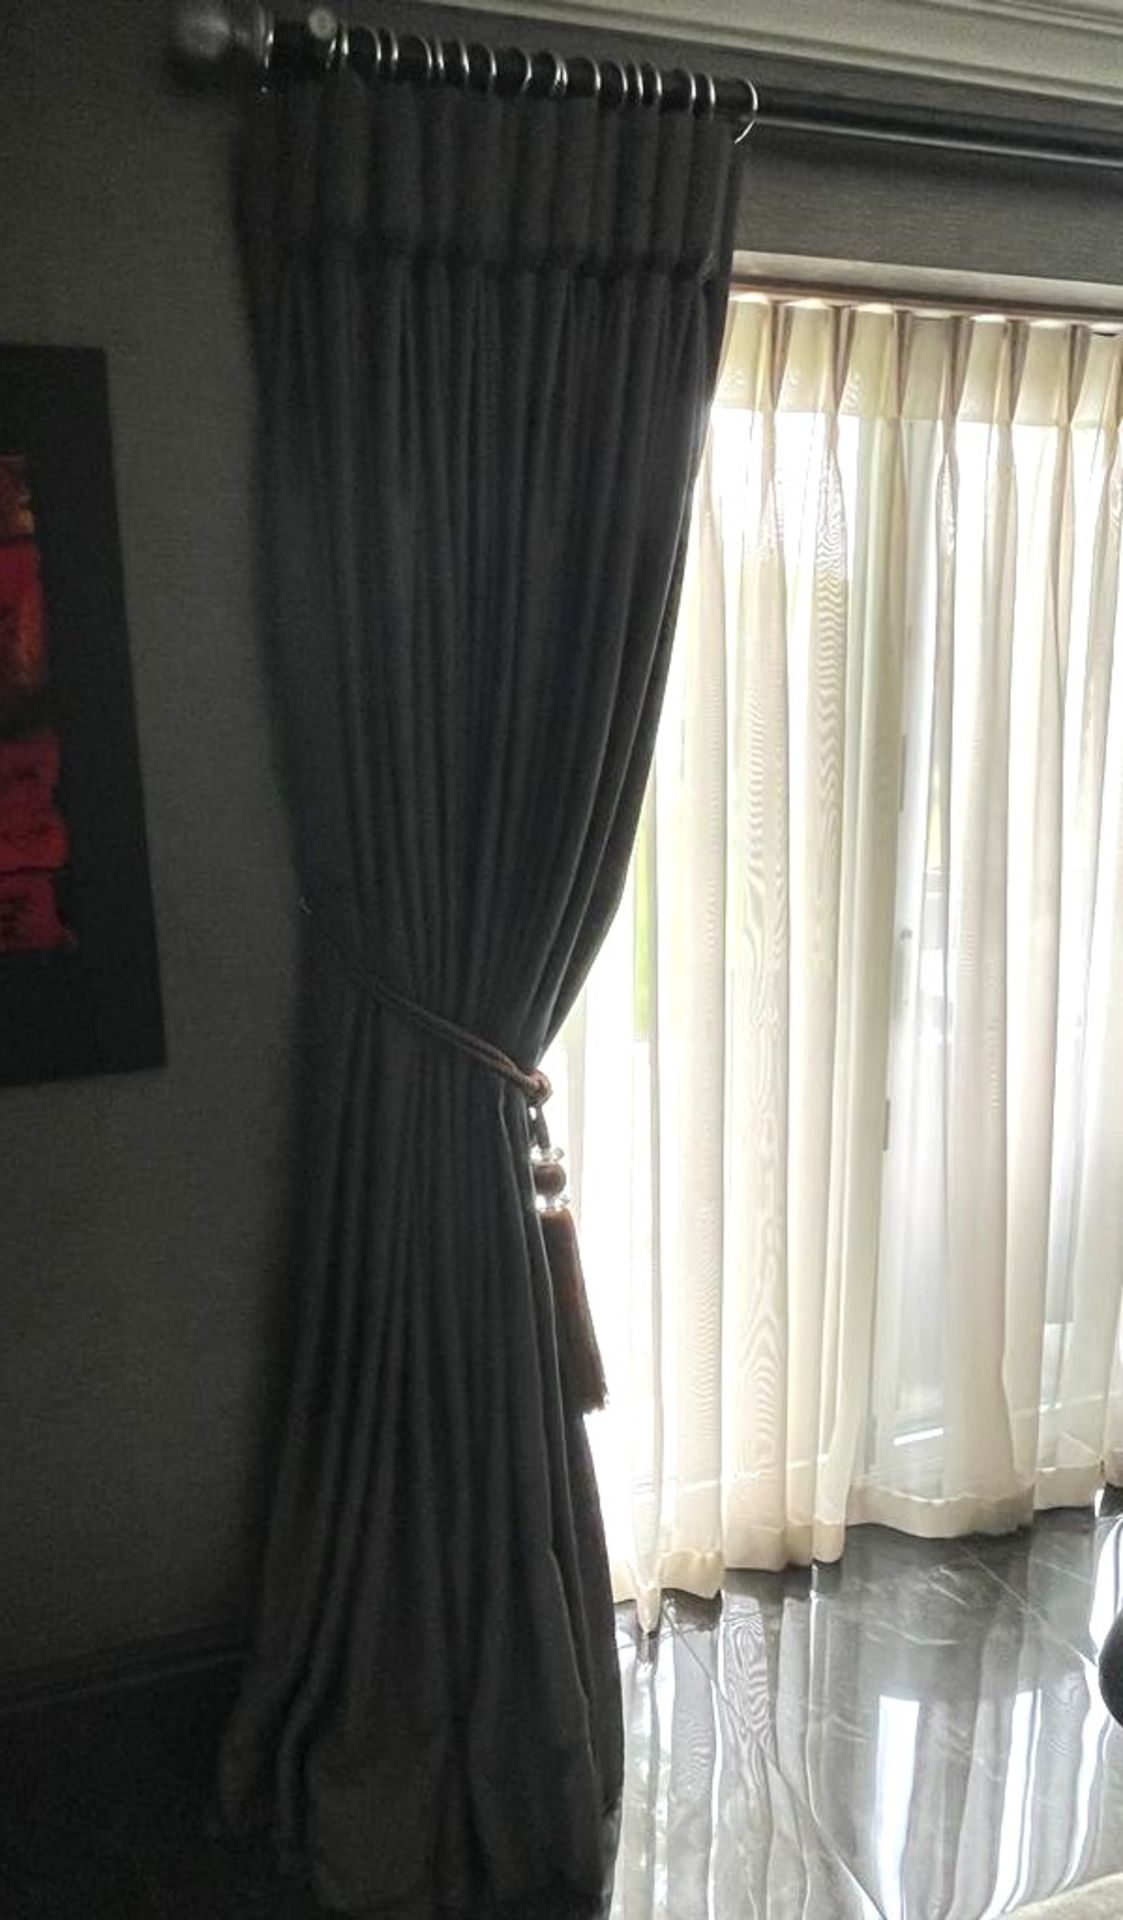 1 x Pair Of Beautiful Full Length Silk Slub Lined Curtains With Silver Pole And Rings - Image 3 of 3